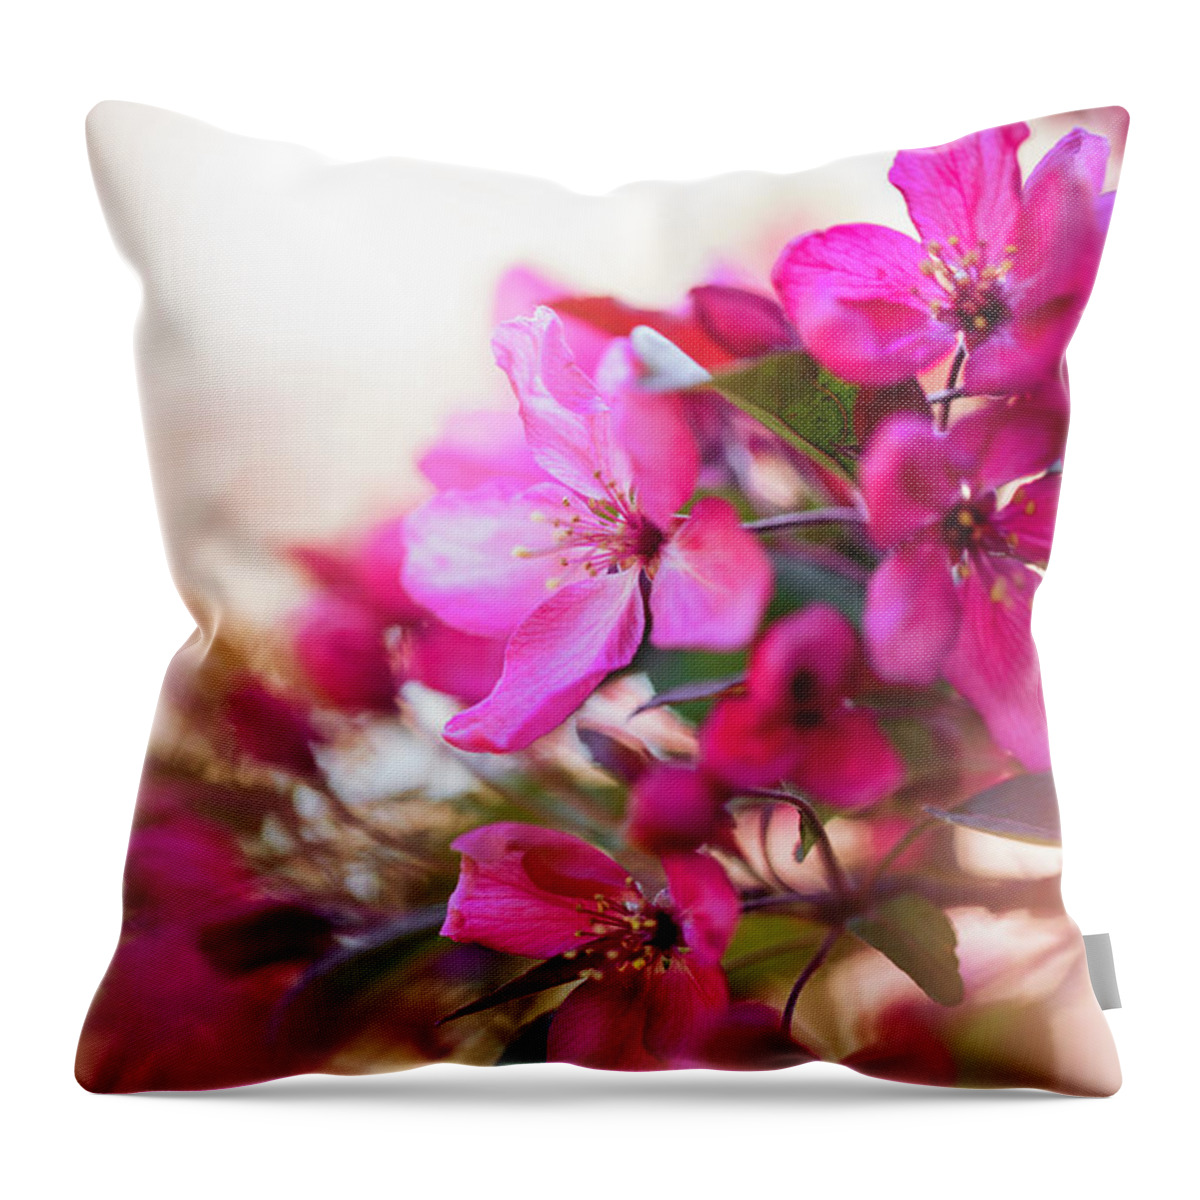  Throw Pillow featuring the photograph Pink Prettyness by Nicole Engstrom